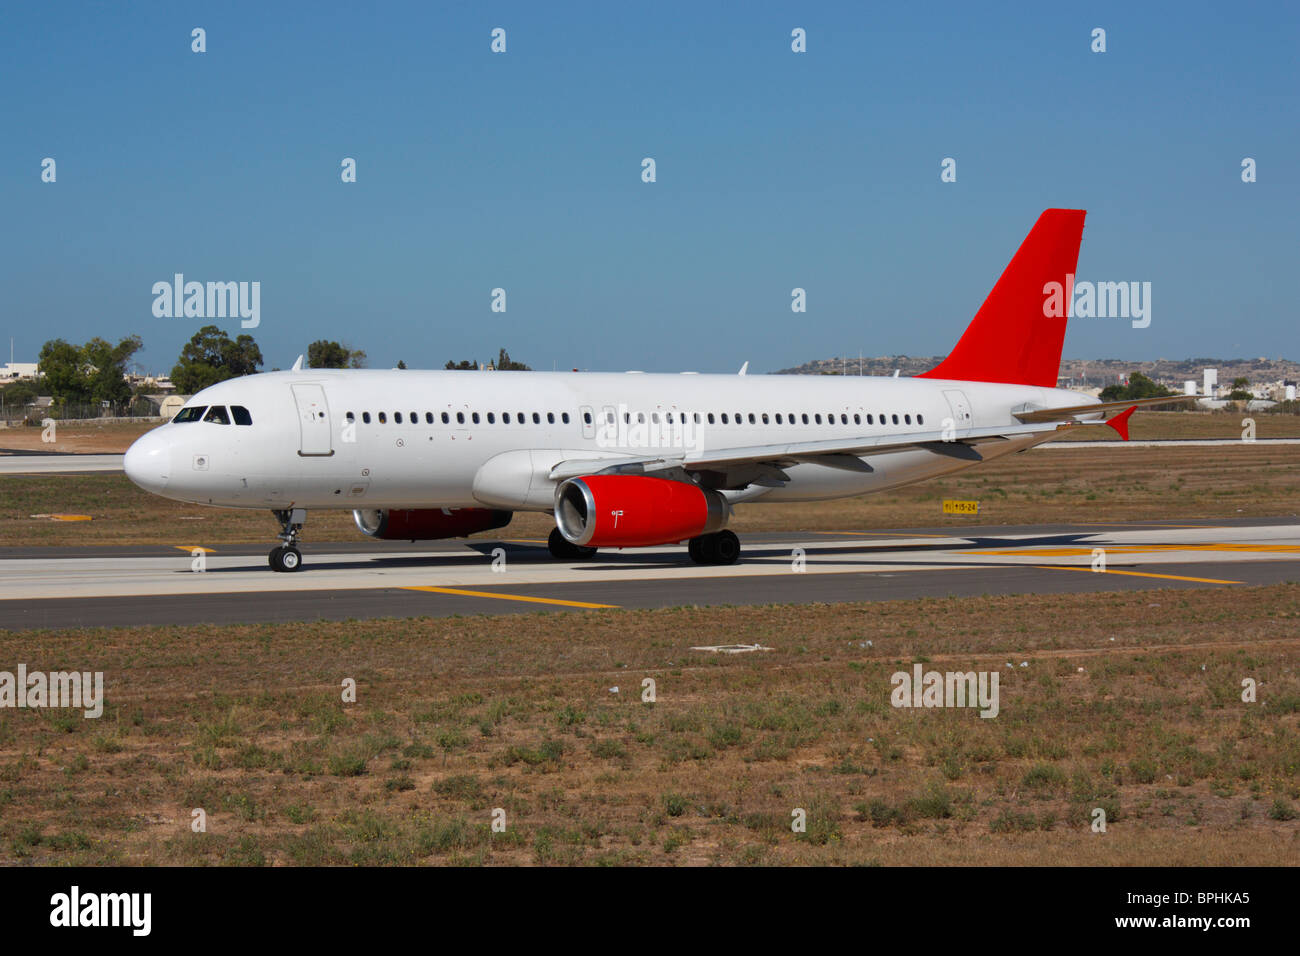 Holiday air travel. Airbus A320 airliner taxiing for departure from airport. Proprietary details deleted. Commercial aviation. Stock Photo